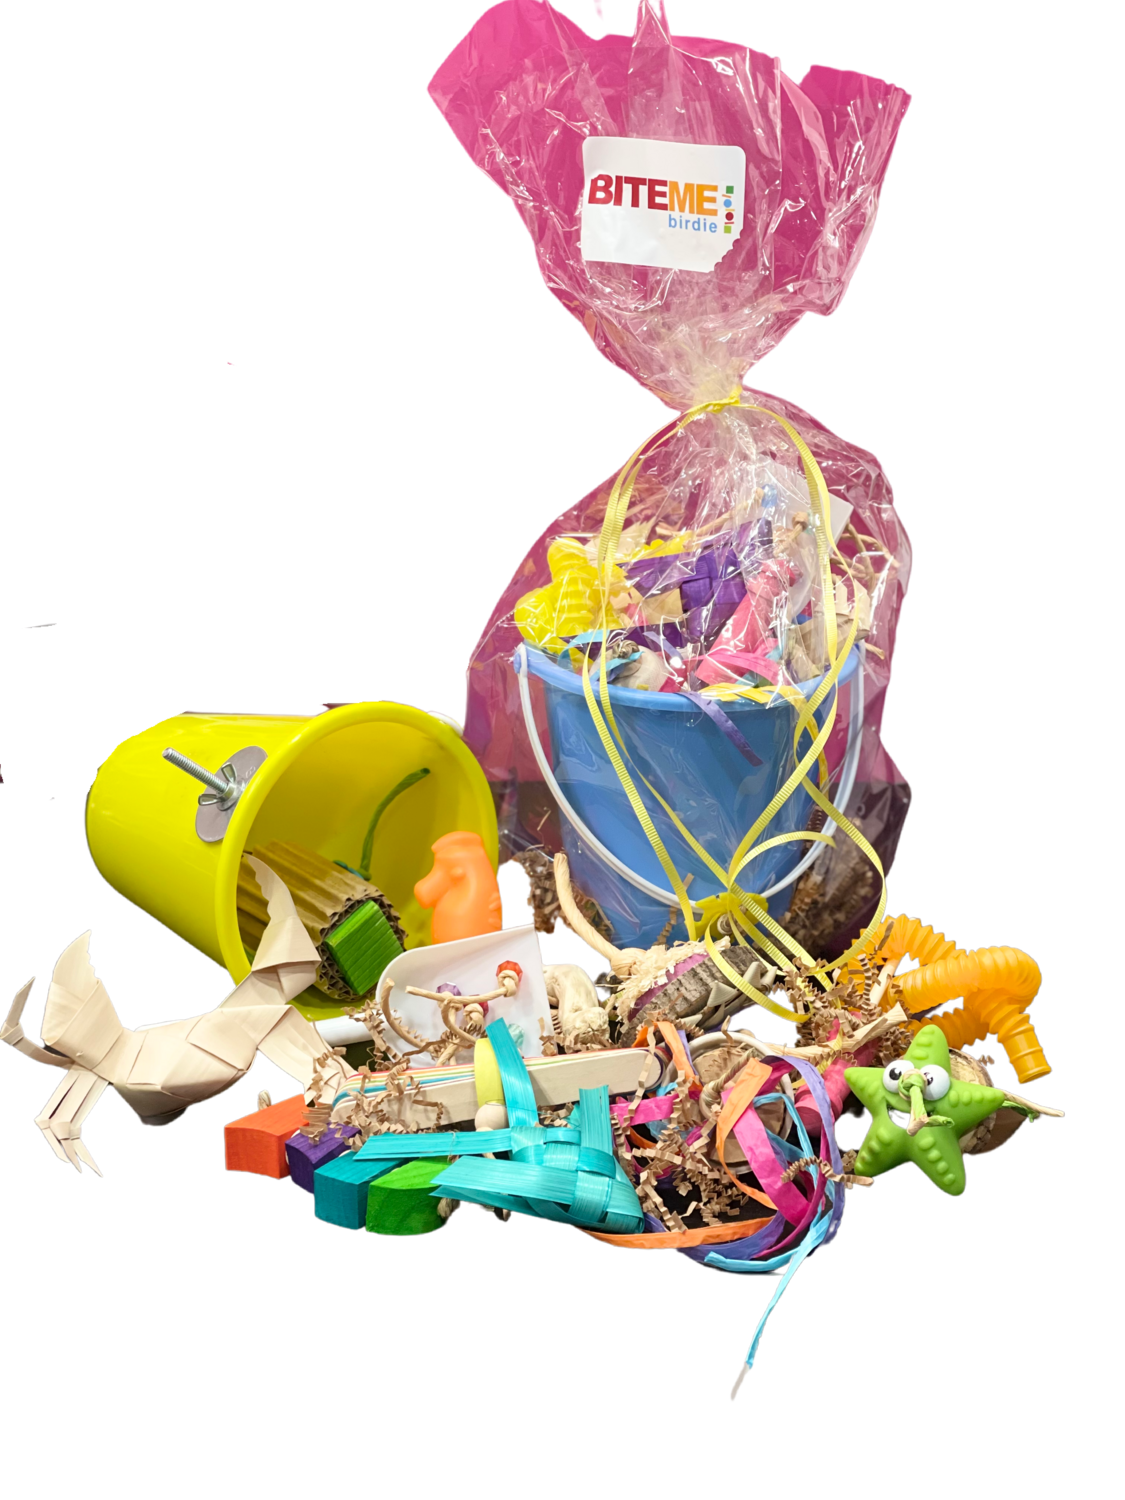 Sandy - Cage Mount Beach Bucket with a variety of summer fun foot toys! - By Bite Me Birdie